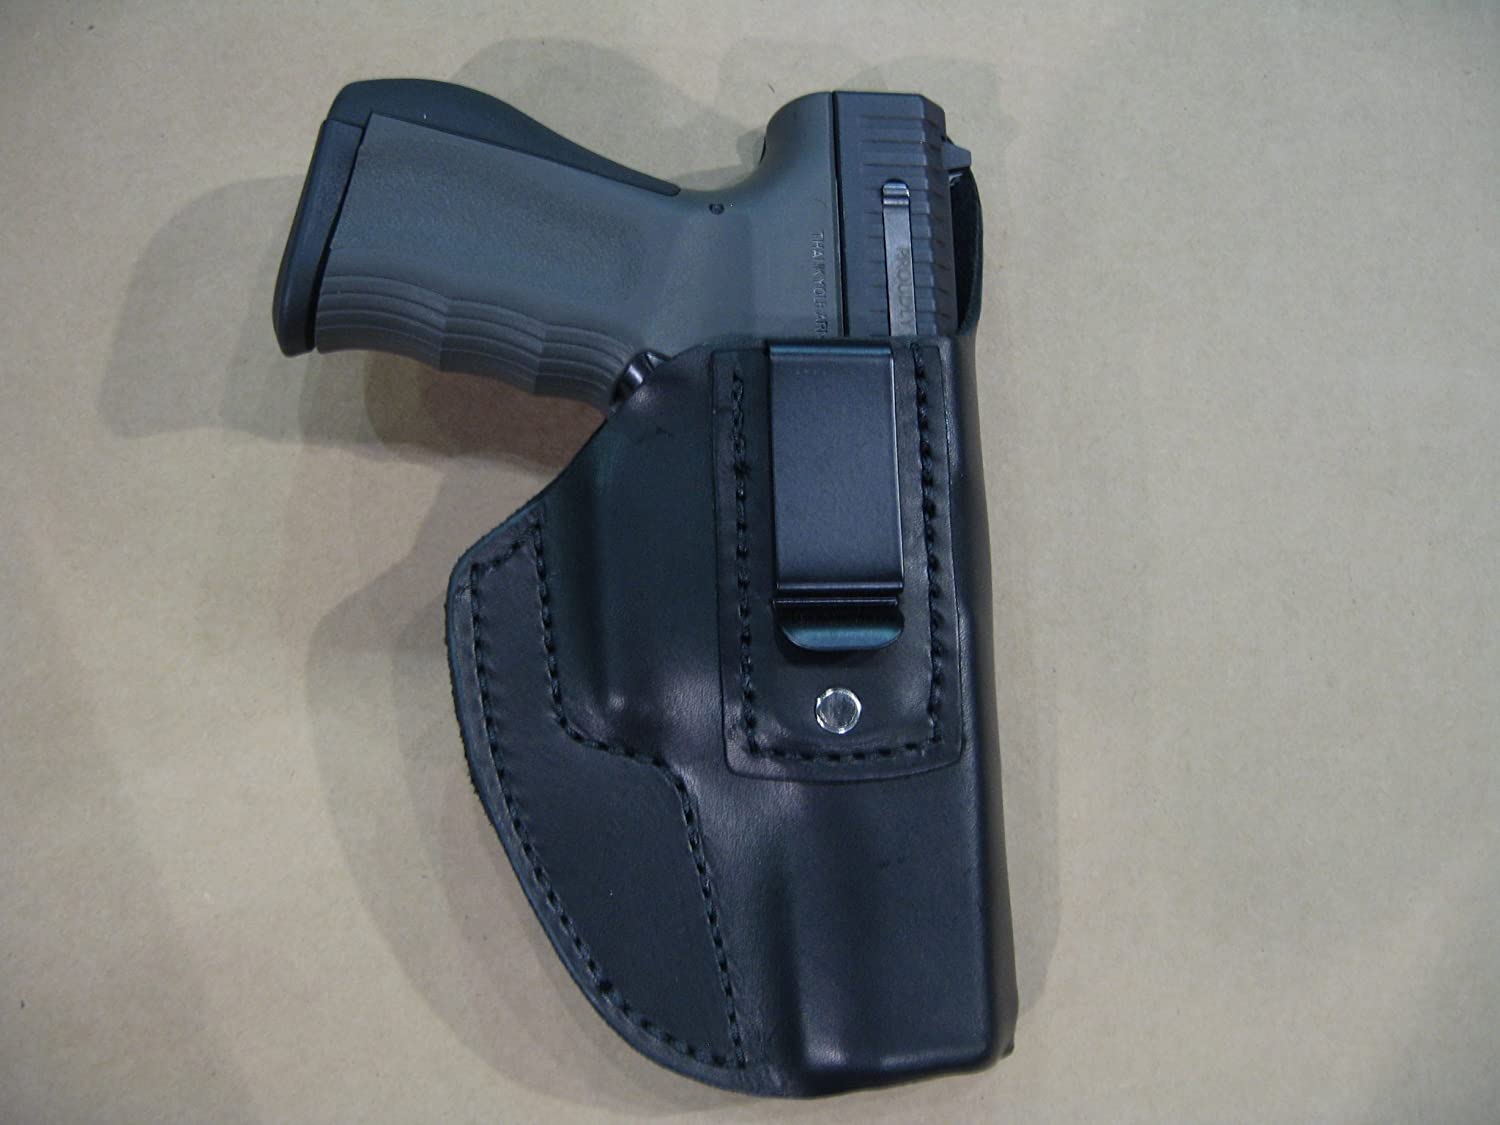 FMK Bill Rights 9C1 9mm IWB Leather in The Waistband Conceal Carry Holster